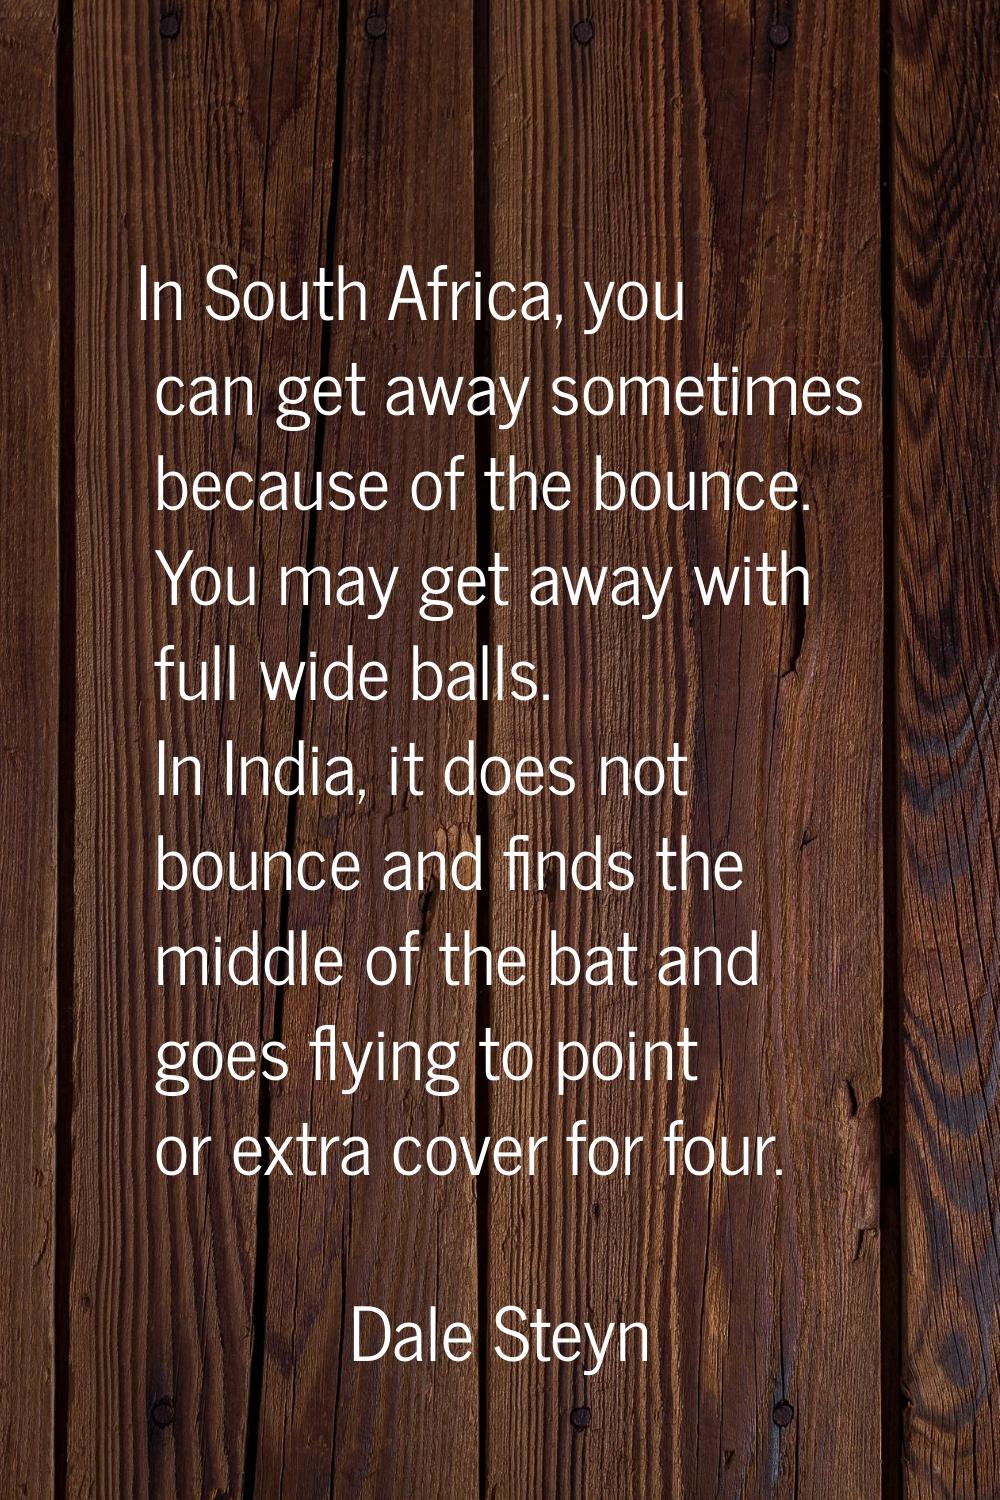 In South Africa, you can get away sometimes because of the bounce. You may get away with full wide 